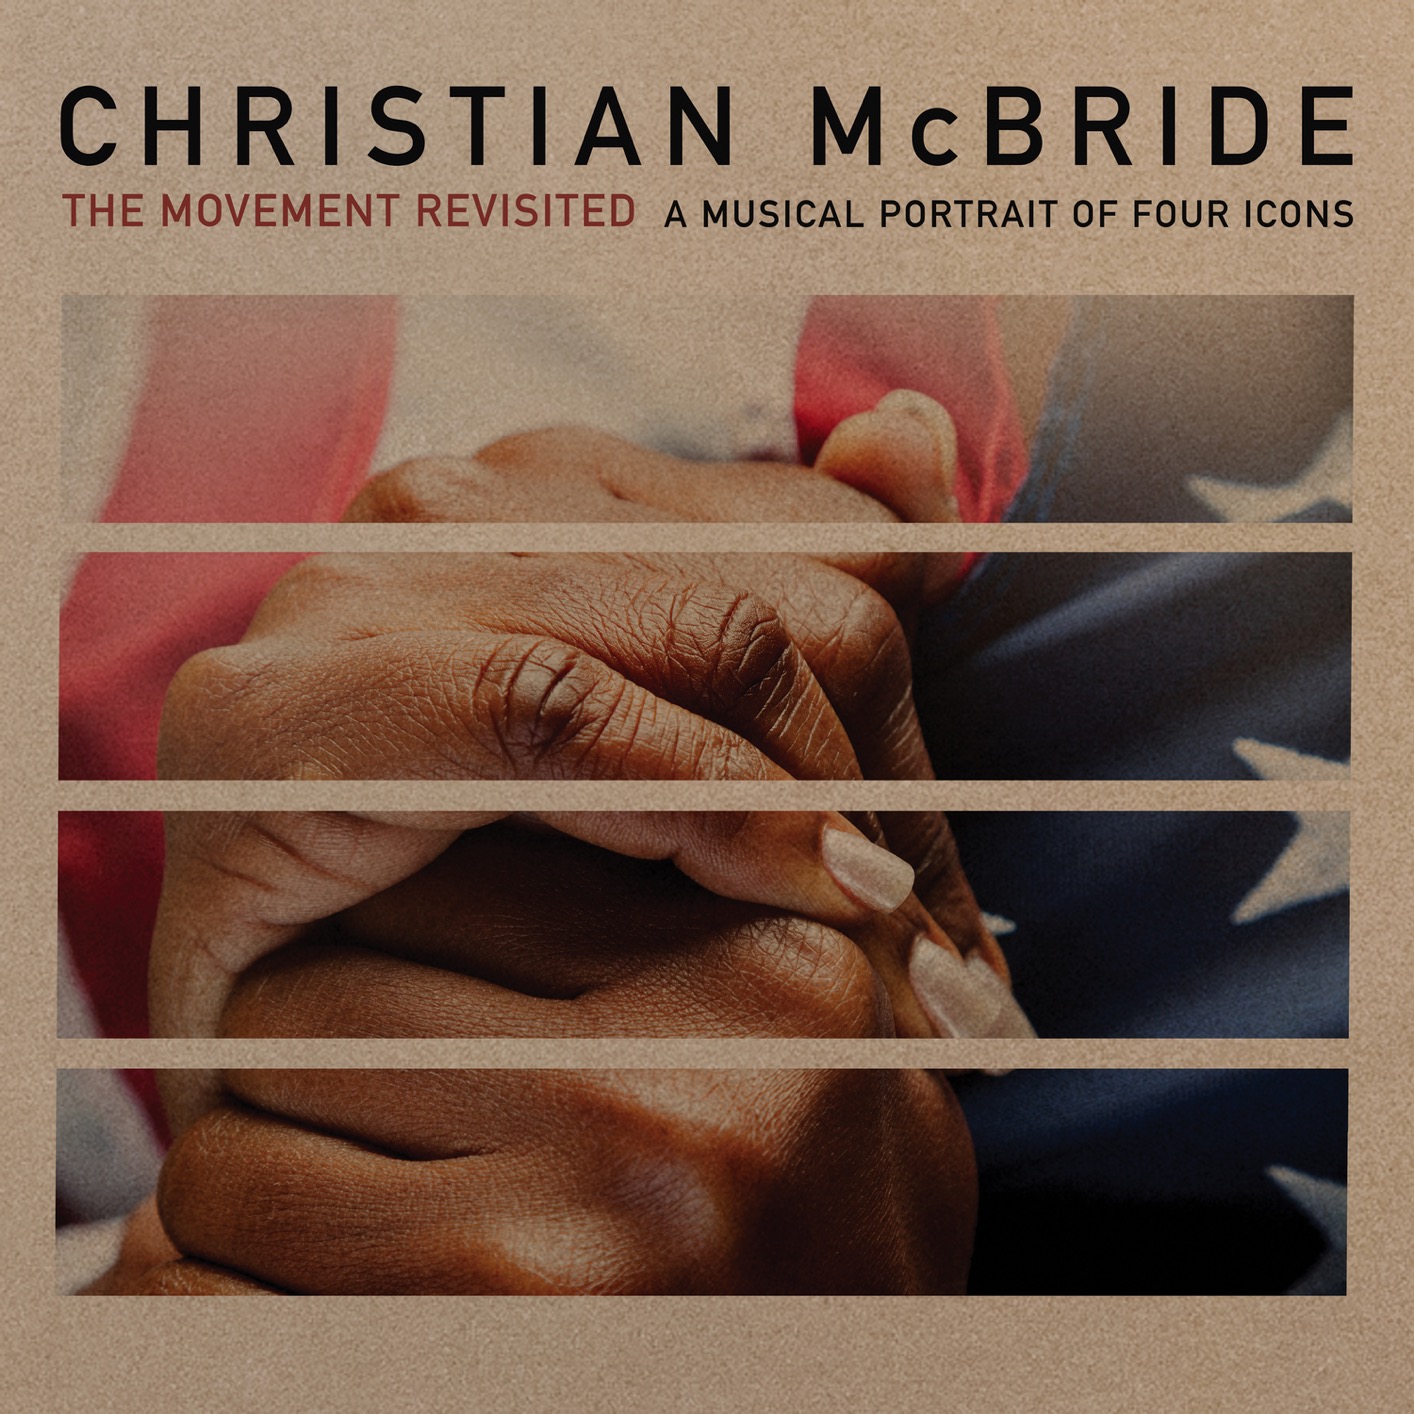 Christian Mcbride - The Movement Revisited: A Musical Portrait Of Four Icons (2020) [FLAC 24bit/96kHz]